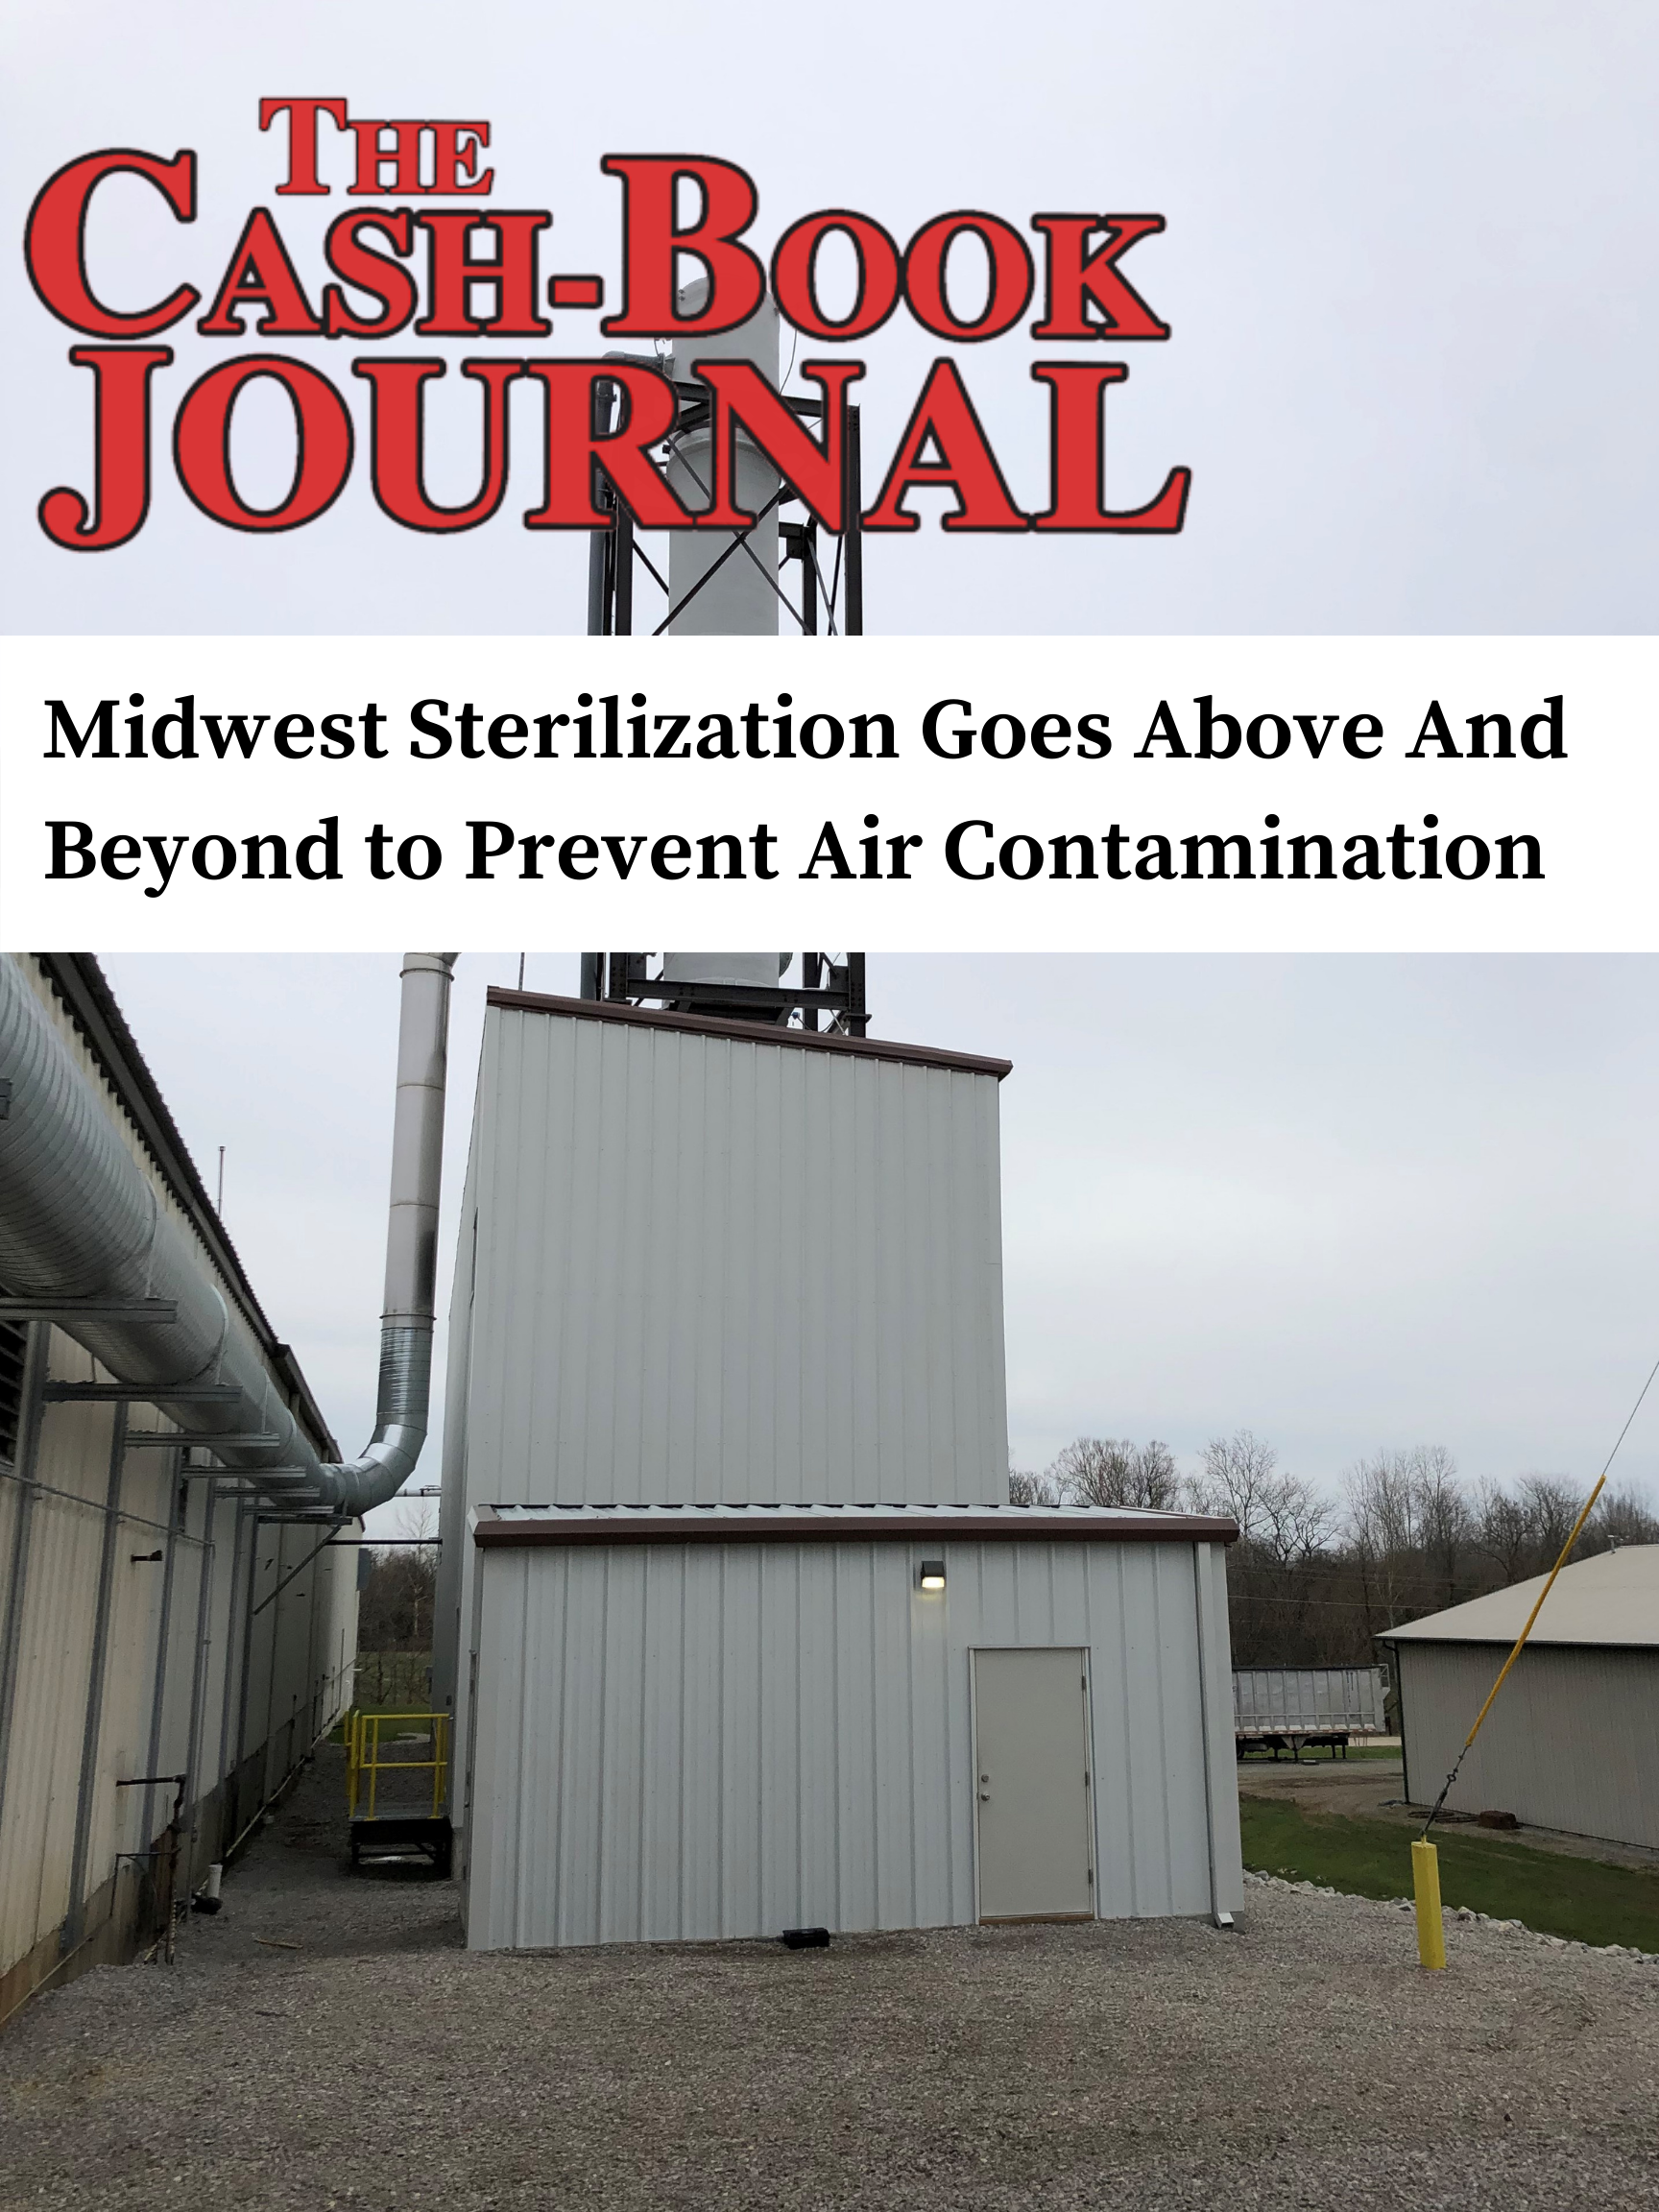 Midwest Sterilization Goes Above And Beyond to Prevent Air Contamination